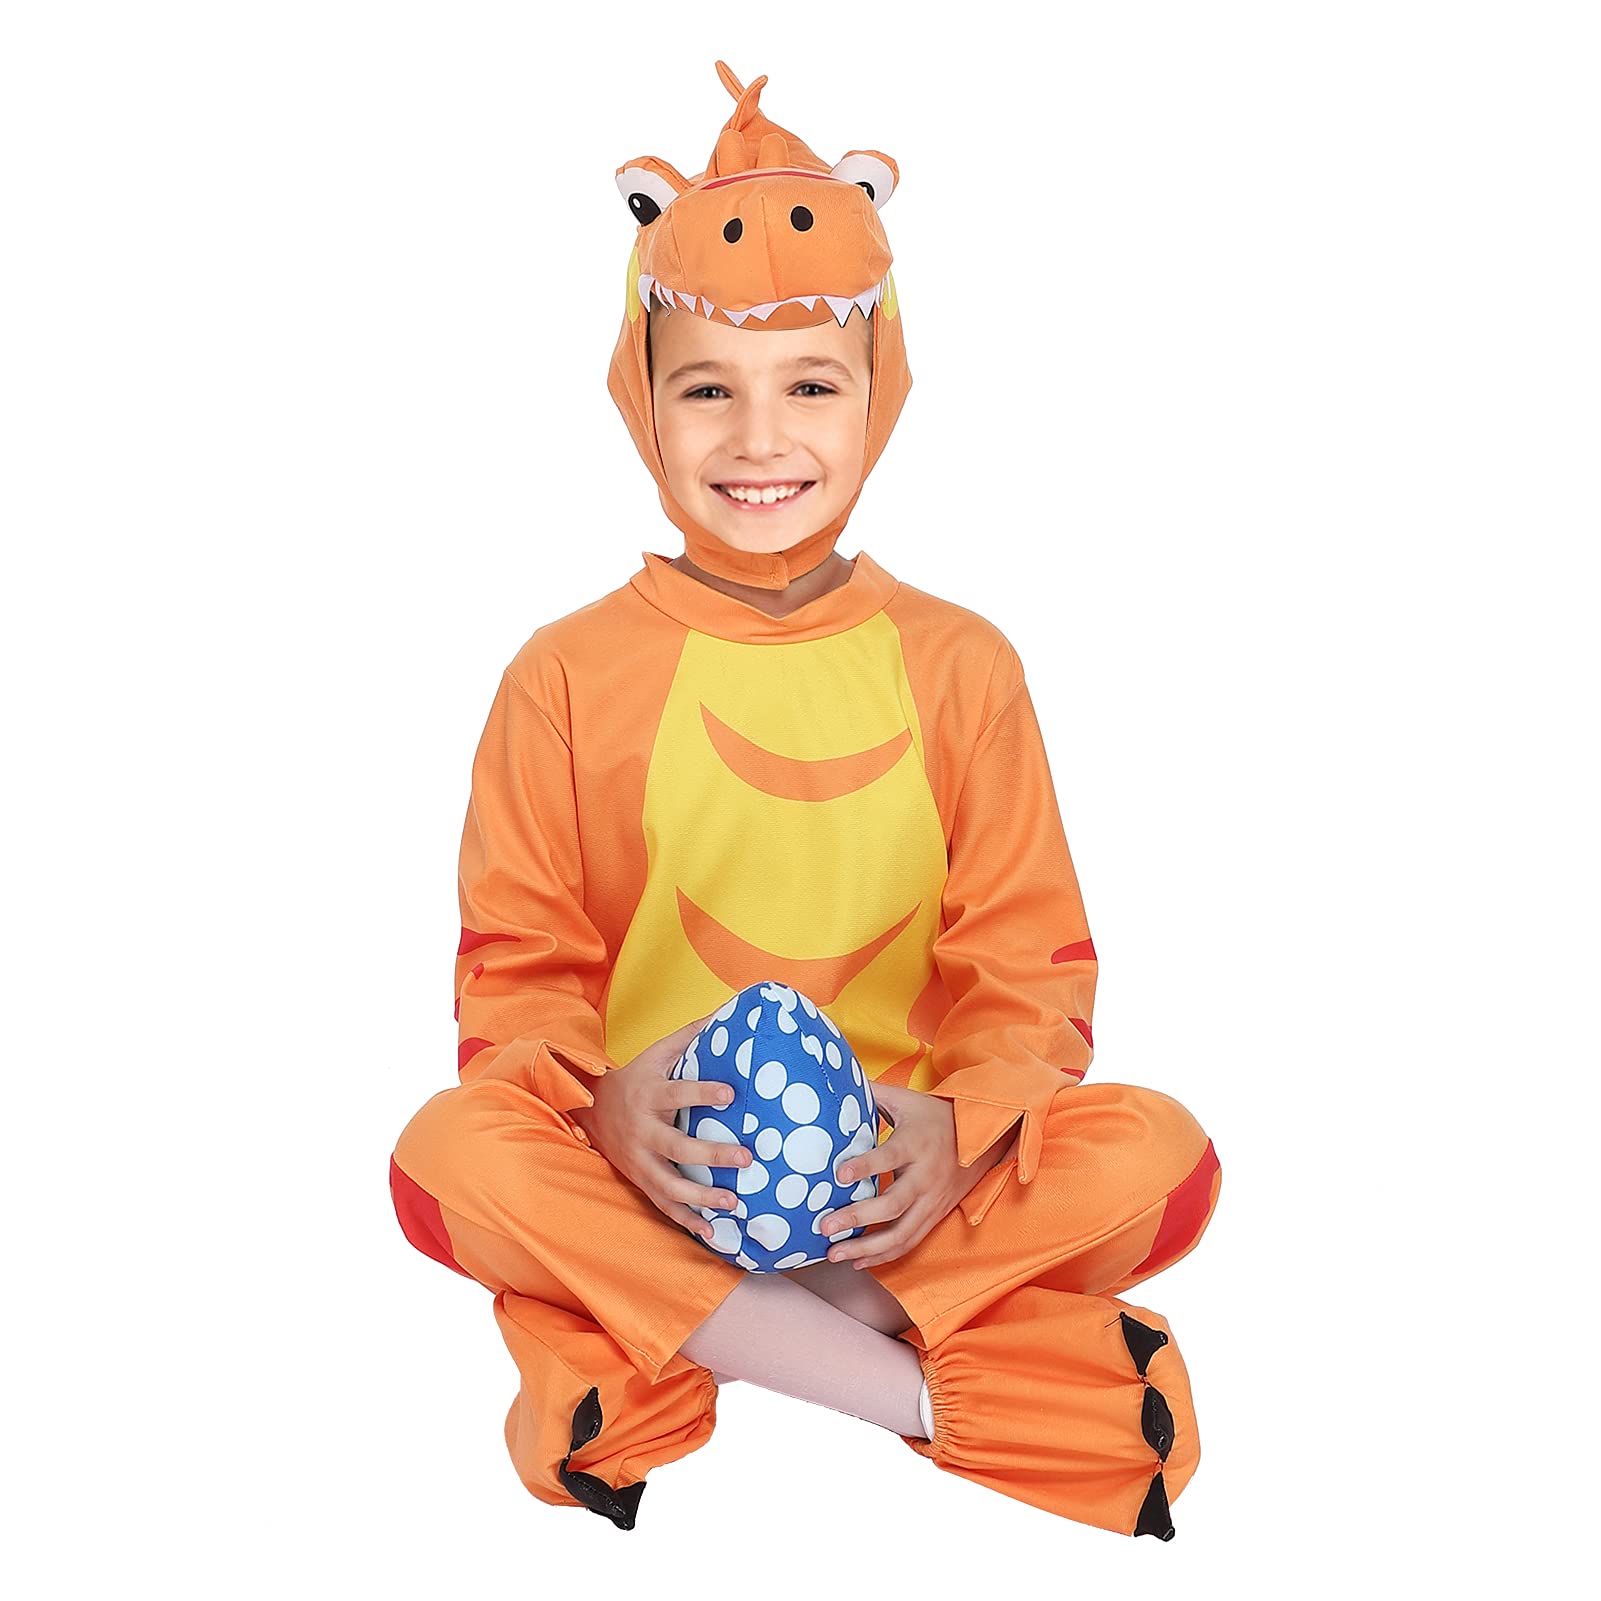 LIZHOUMIL Dinosaur Costume with Hat - Children's Dinosaur Dress-Up for Party, Role Play, and Cosplay